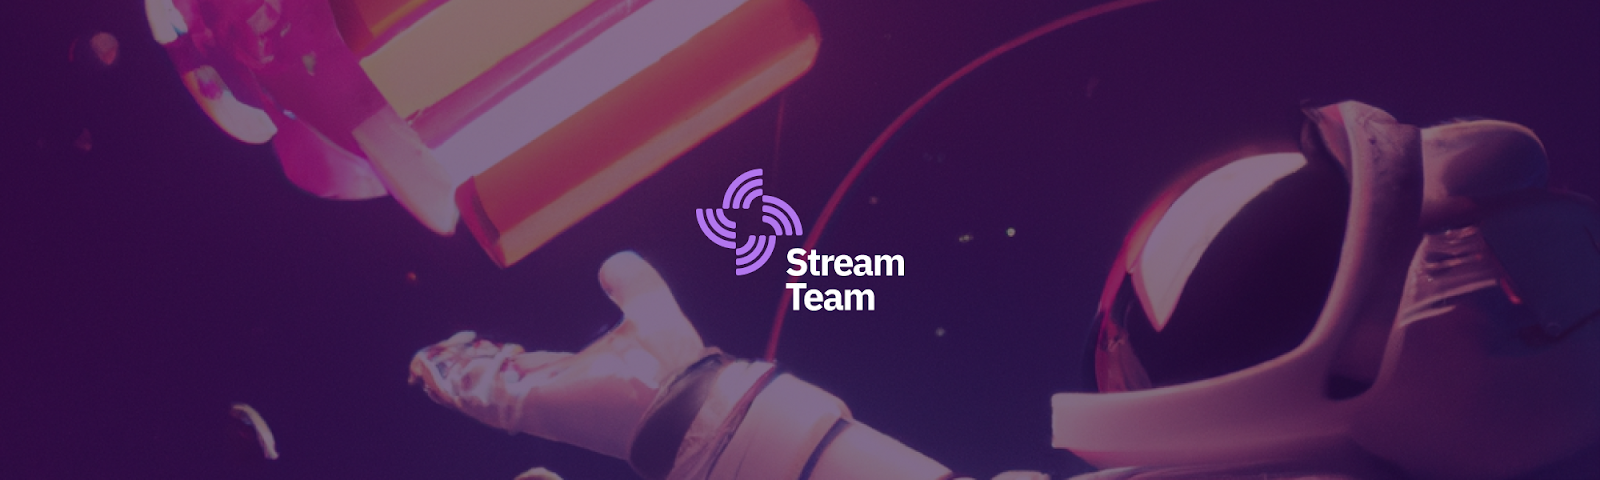 Join the StreamTeam